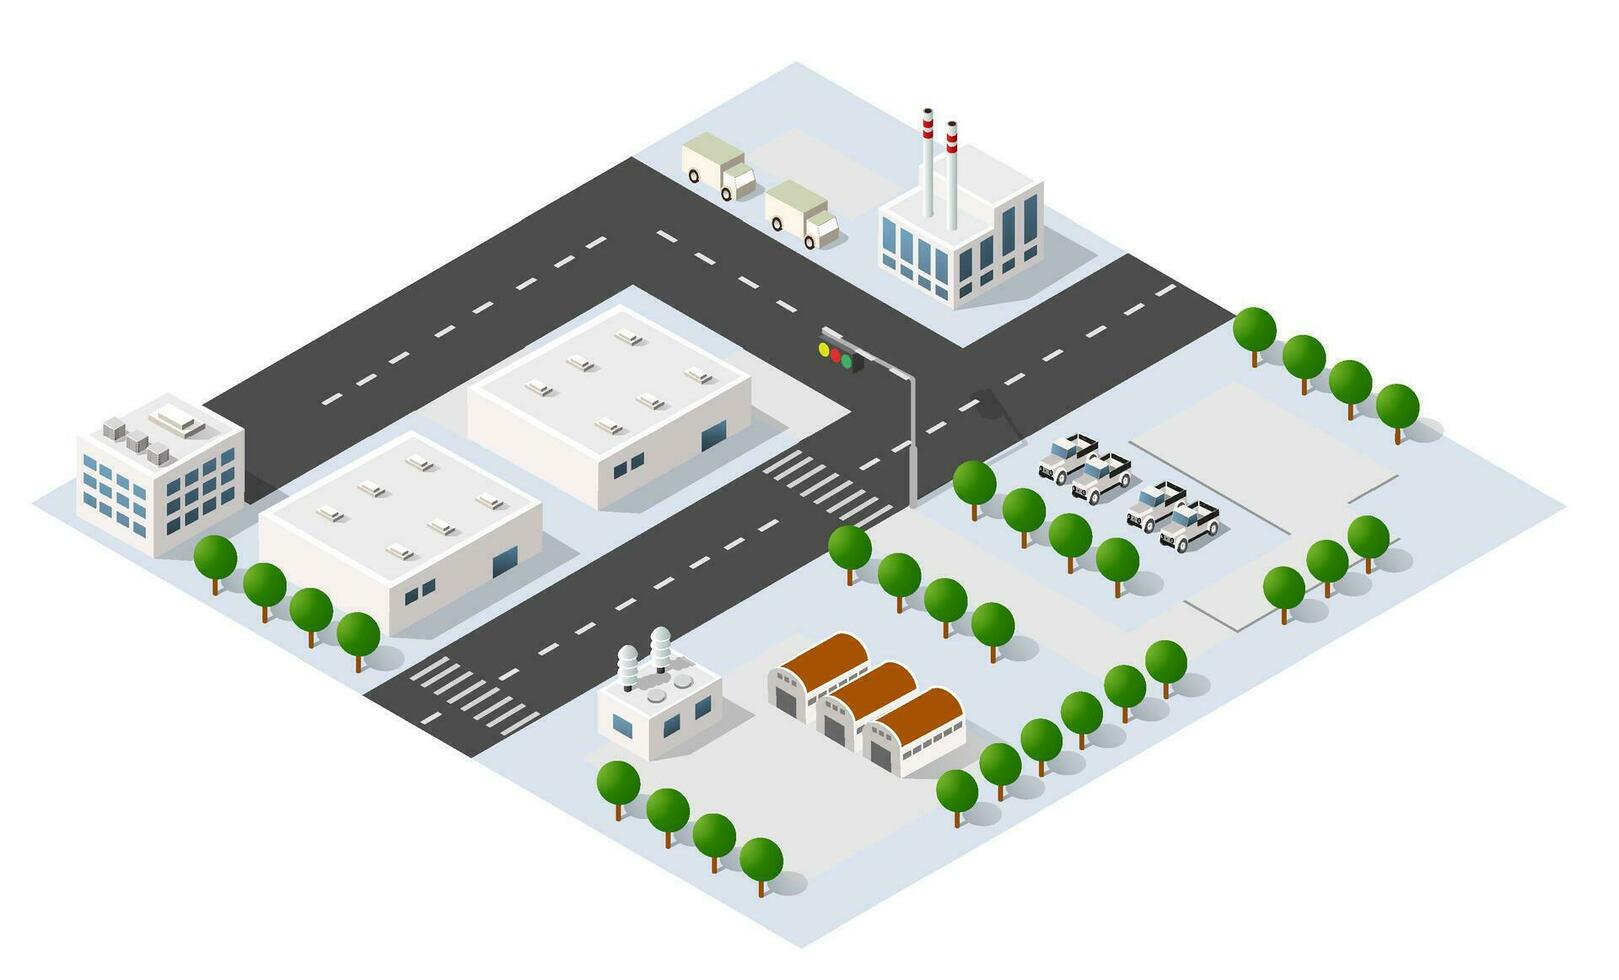 Isometric 3D city module industrial urban factory which includes buildings, power plants, heating gas, warehouse. vector